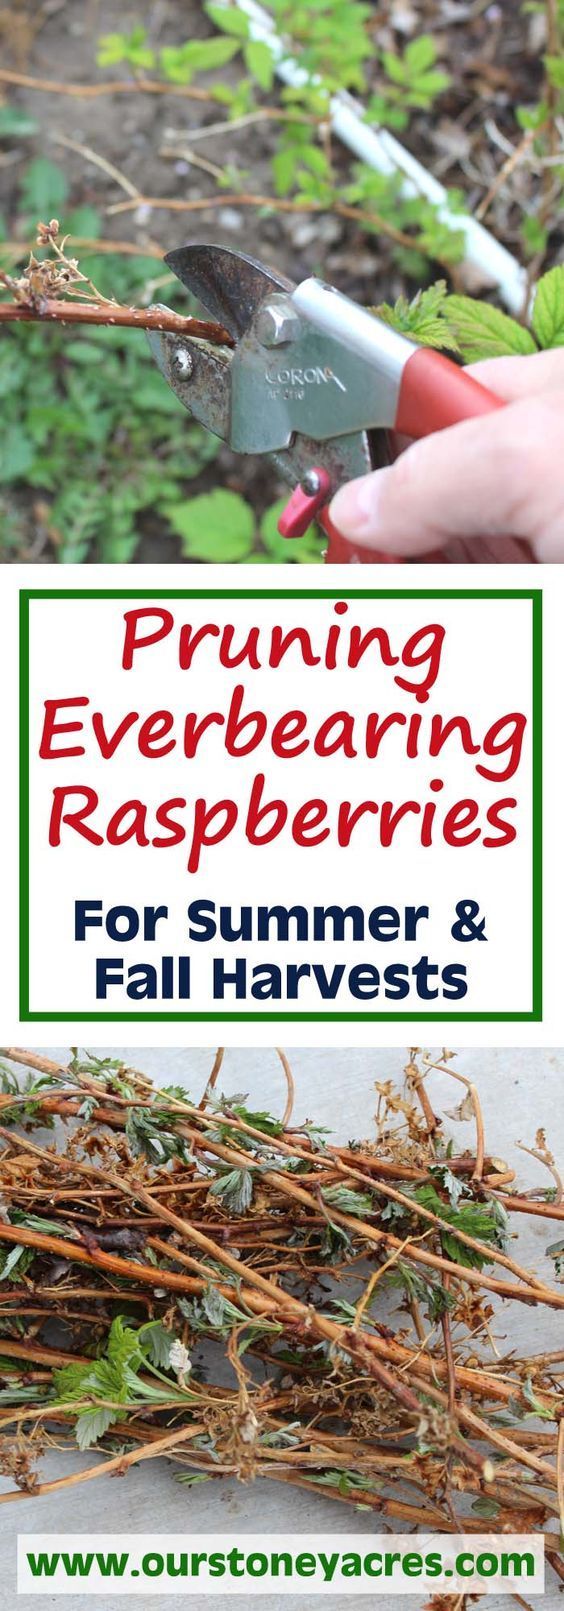 There are 2 methods for Pruning everbearing raspberries, one is simple, the other takes more time. This post will cover both